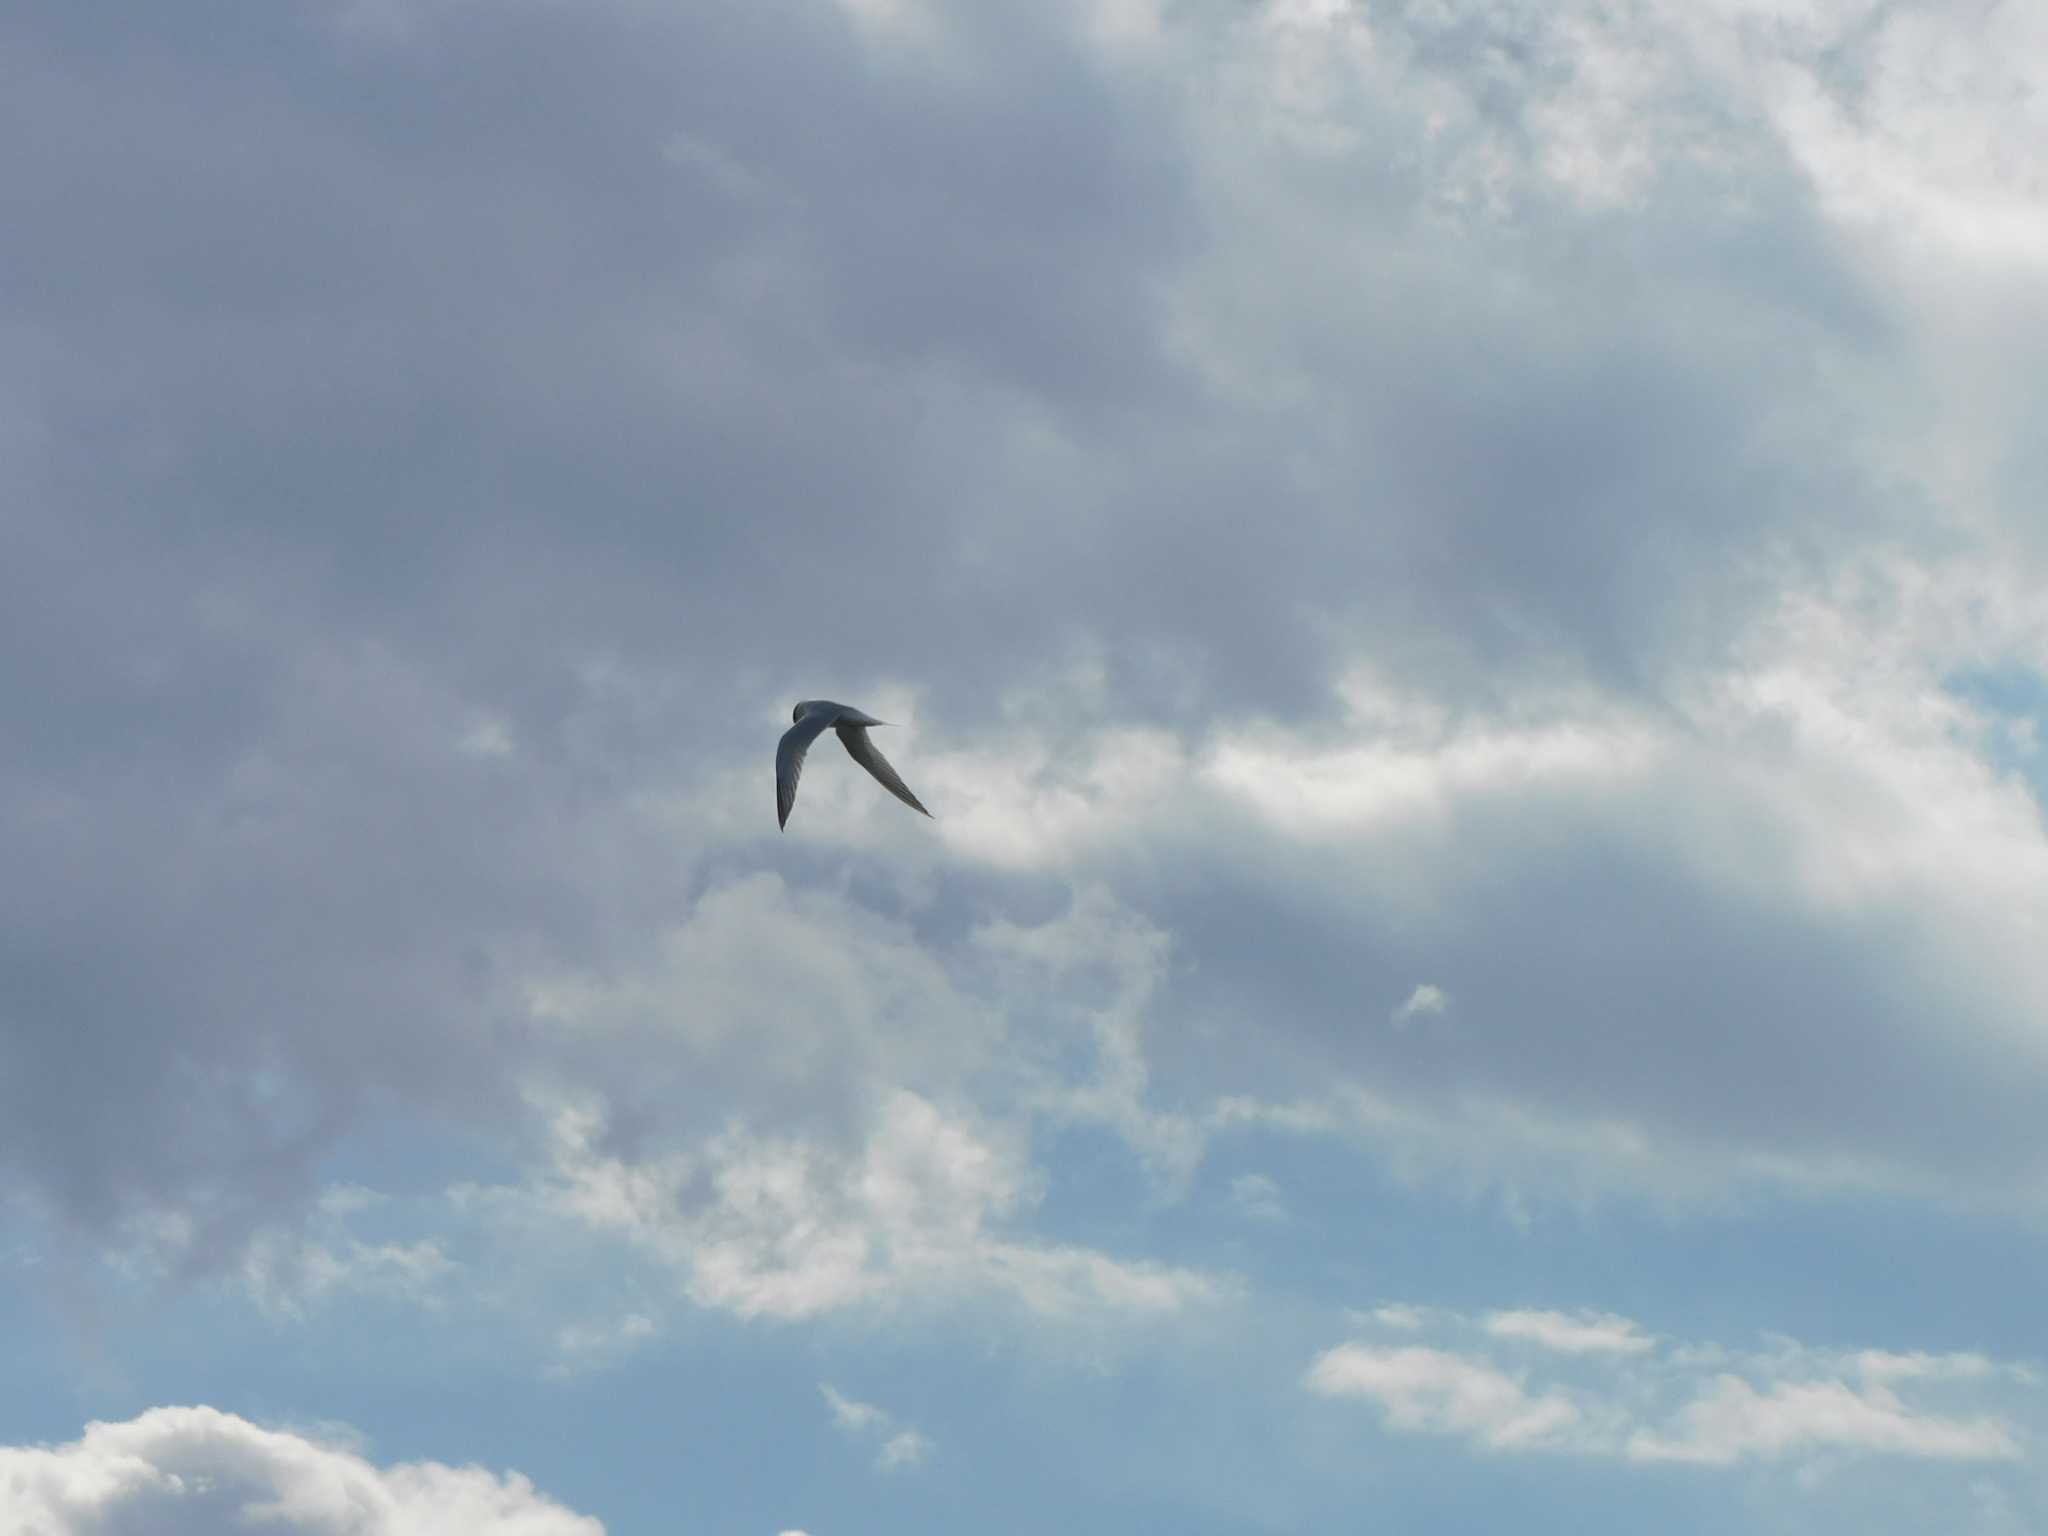 Photo of Little Tern at Isanuma by ななほしてんとうむし